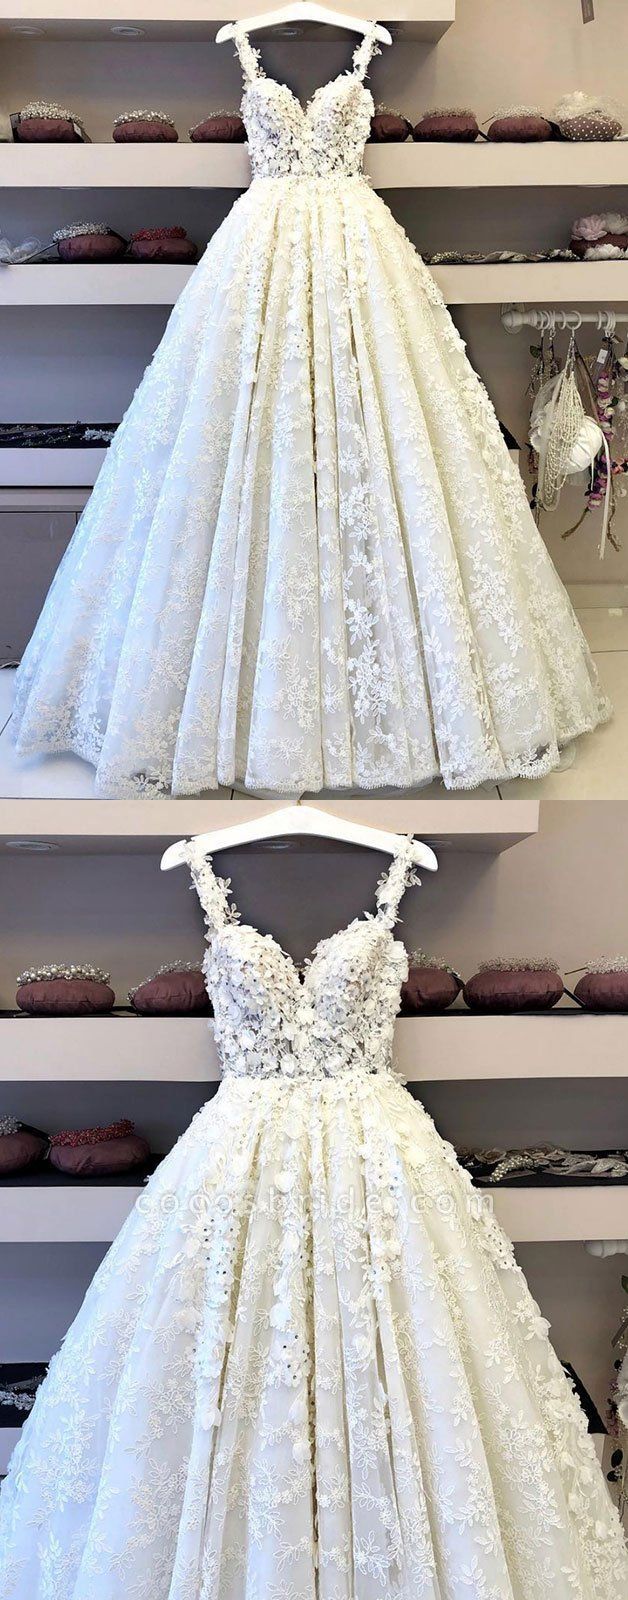 White Flower Lace Boho Lace Wedding Dress With Sleeves | Cocosbride